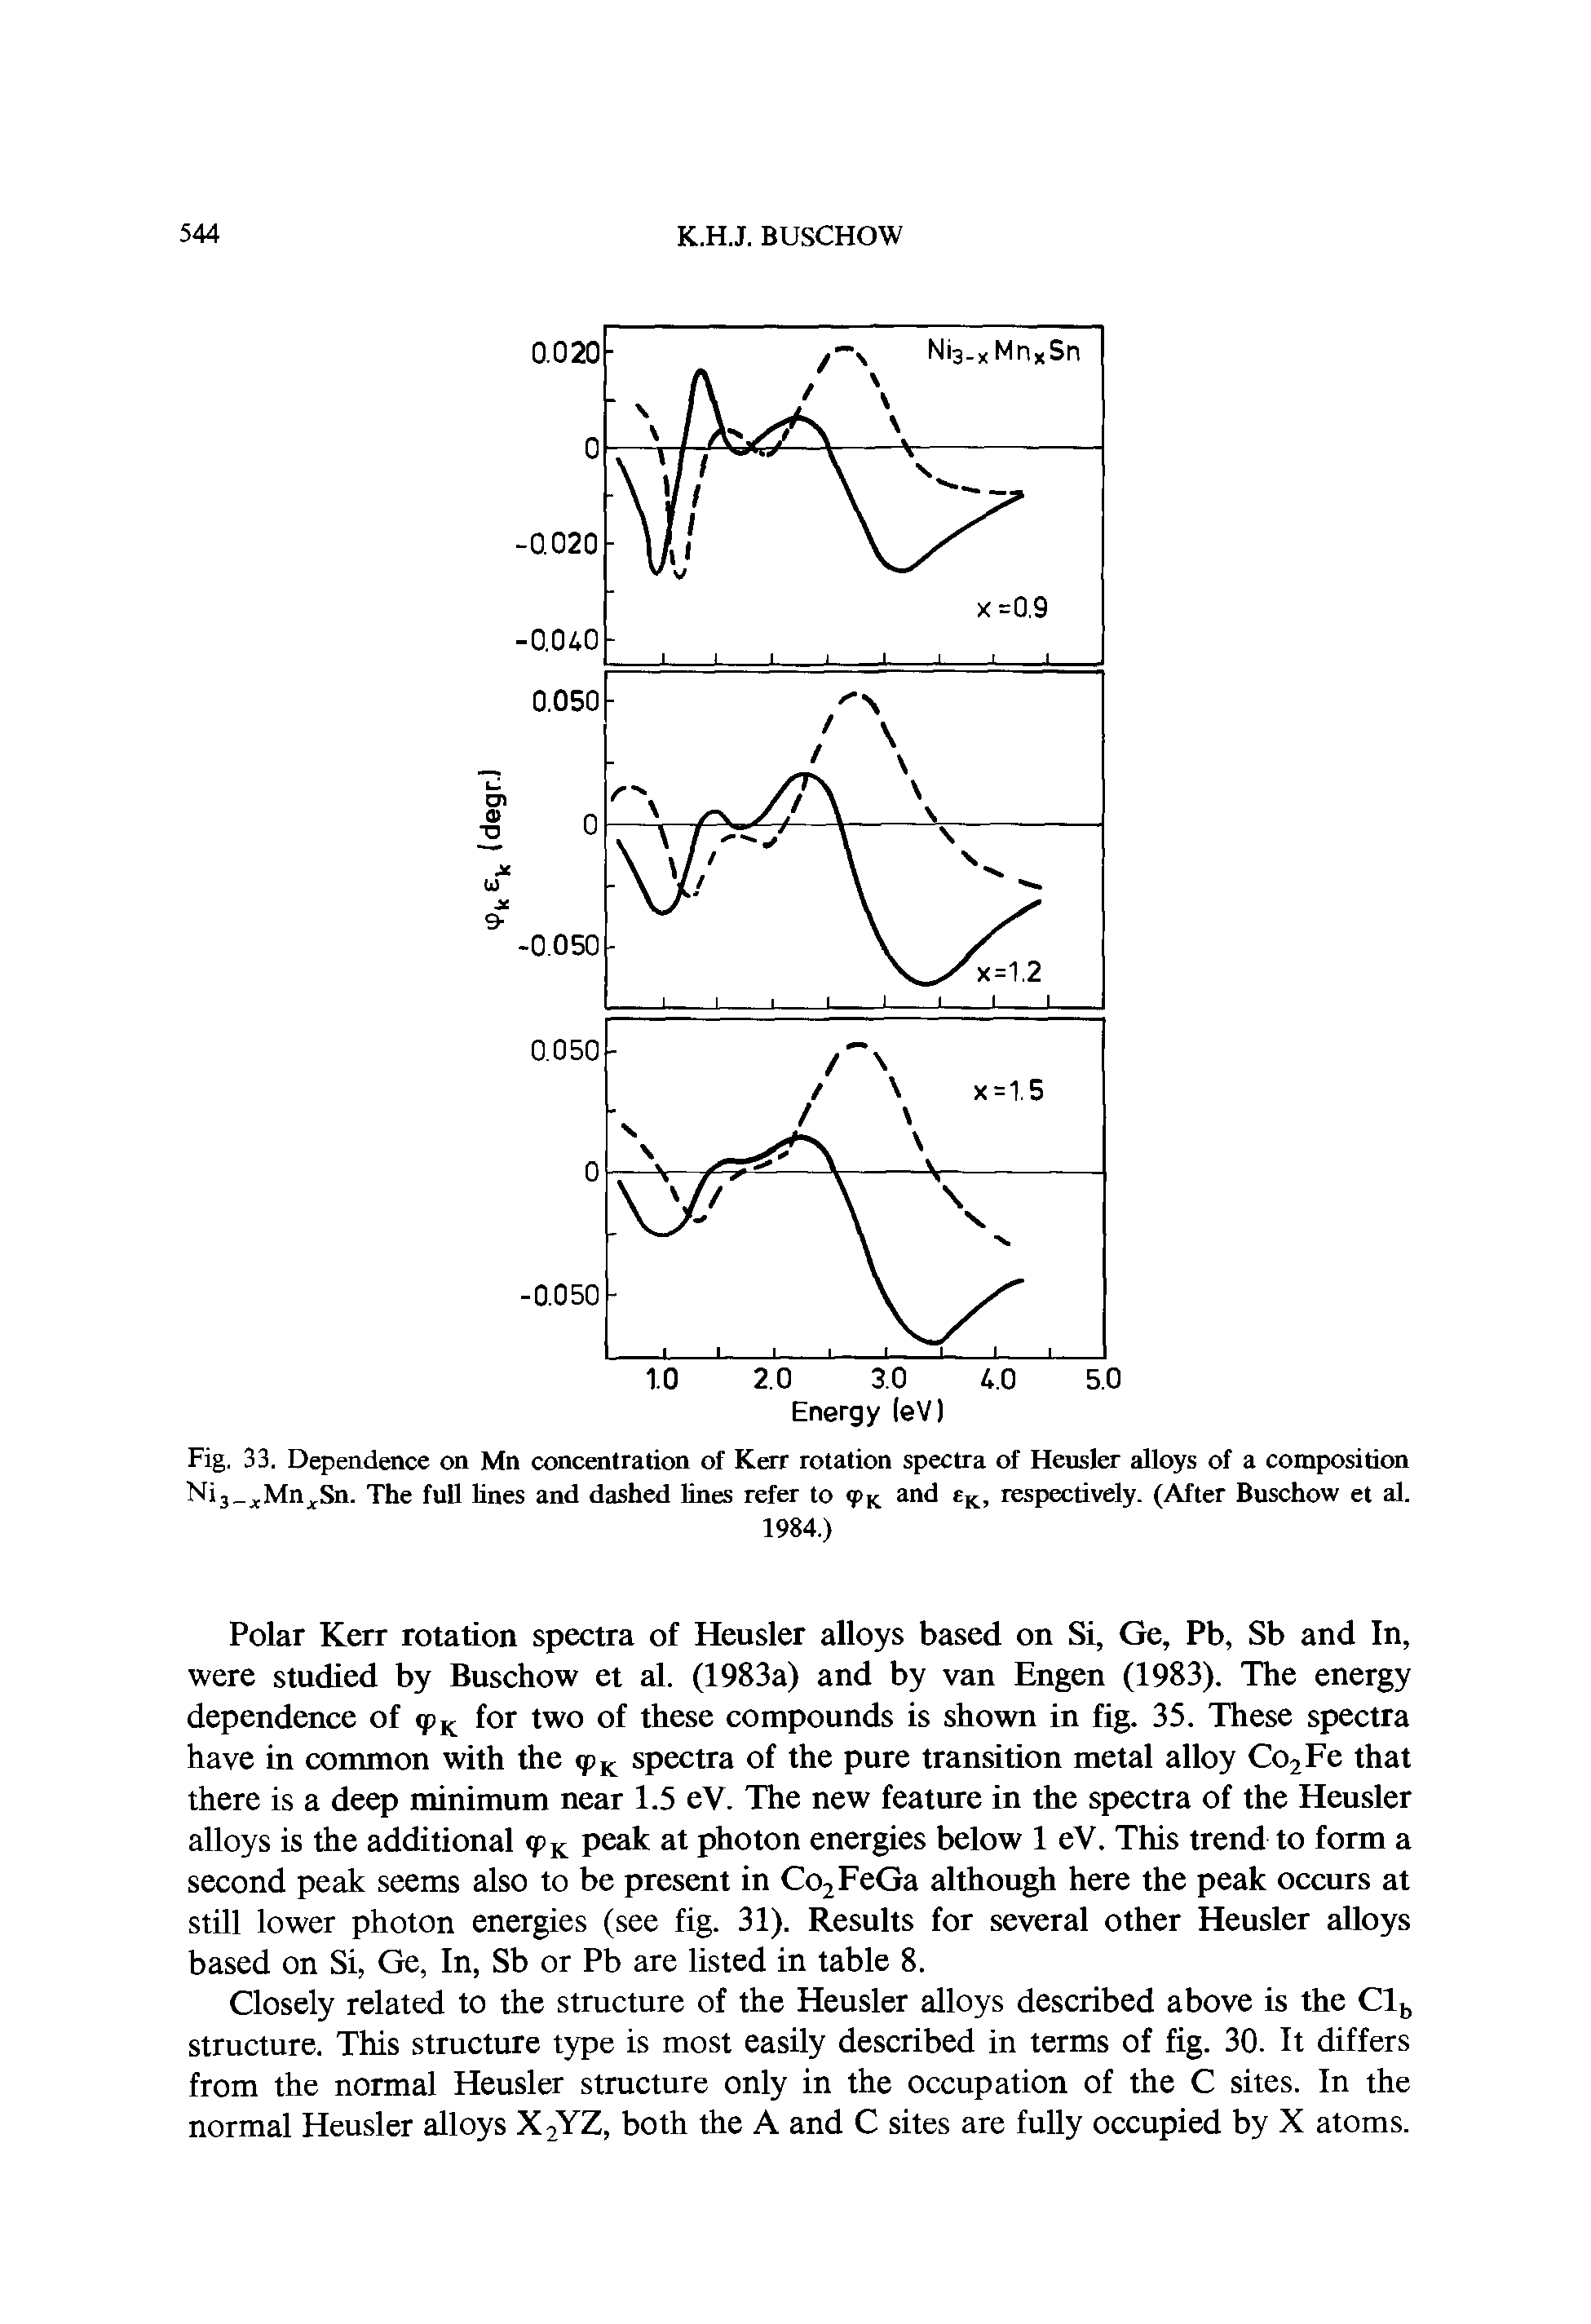 Fig. 33. Dependence on Mn concentration of Kerr rotation spectra of Heusler alloys of a composition Ni3 tMnJCSn. The full lines and dashed lines refer to <pK and eK, respectively. (After Buschow et al.